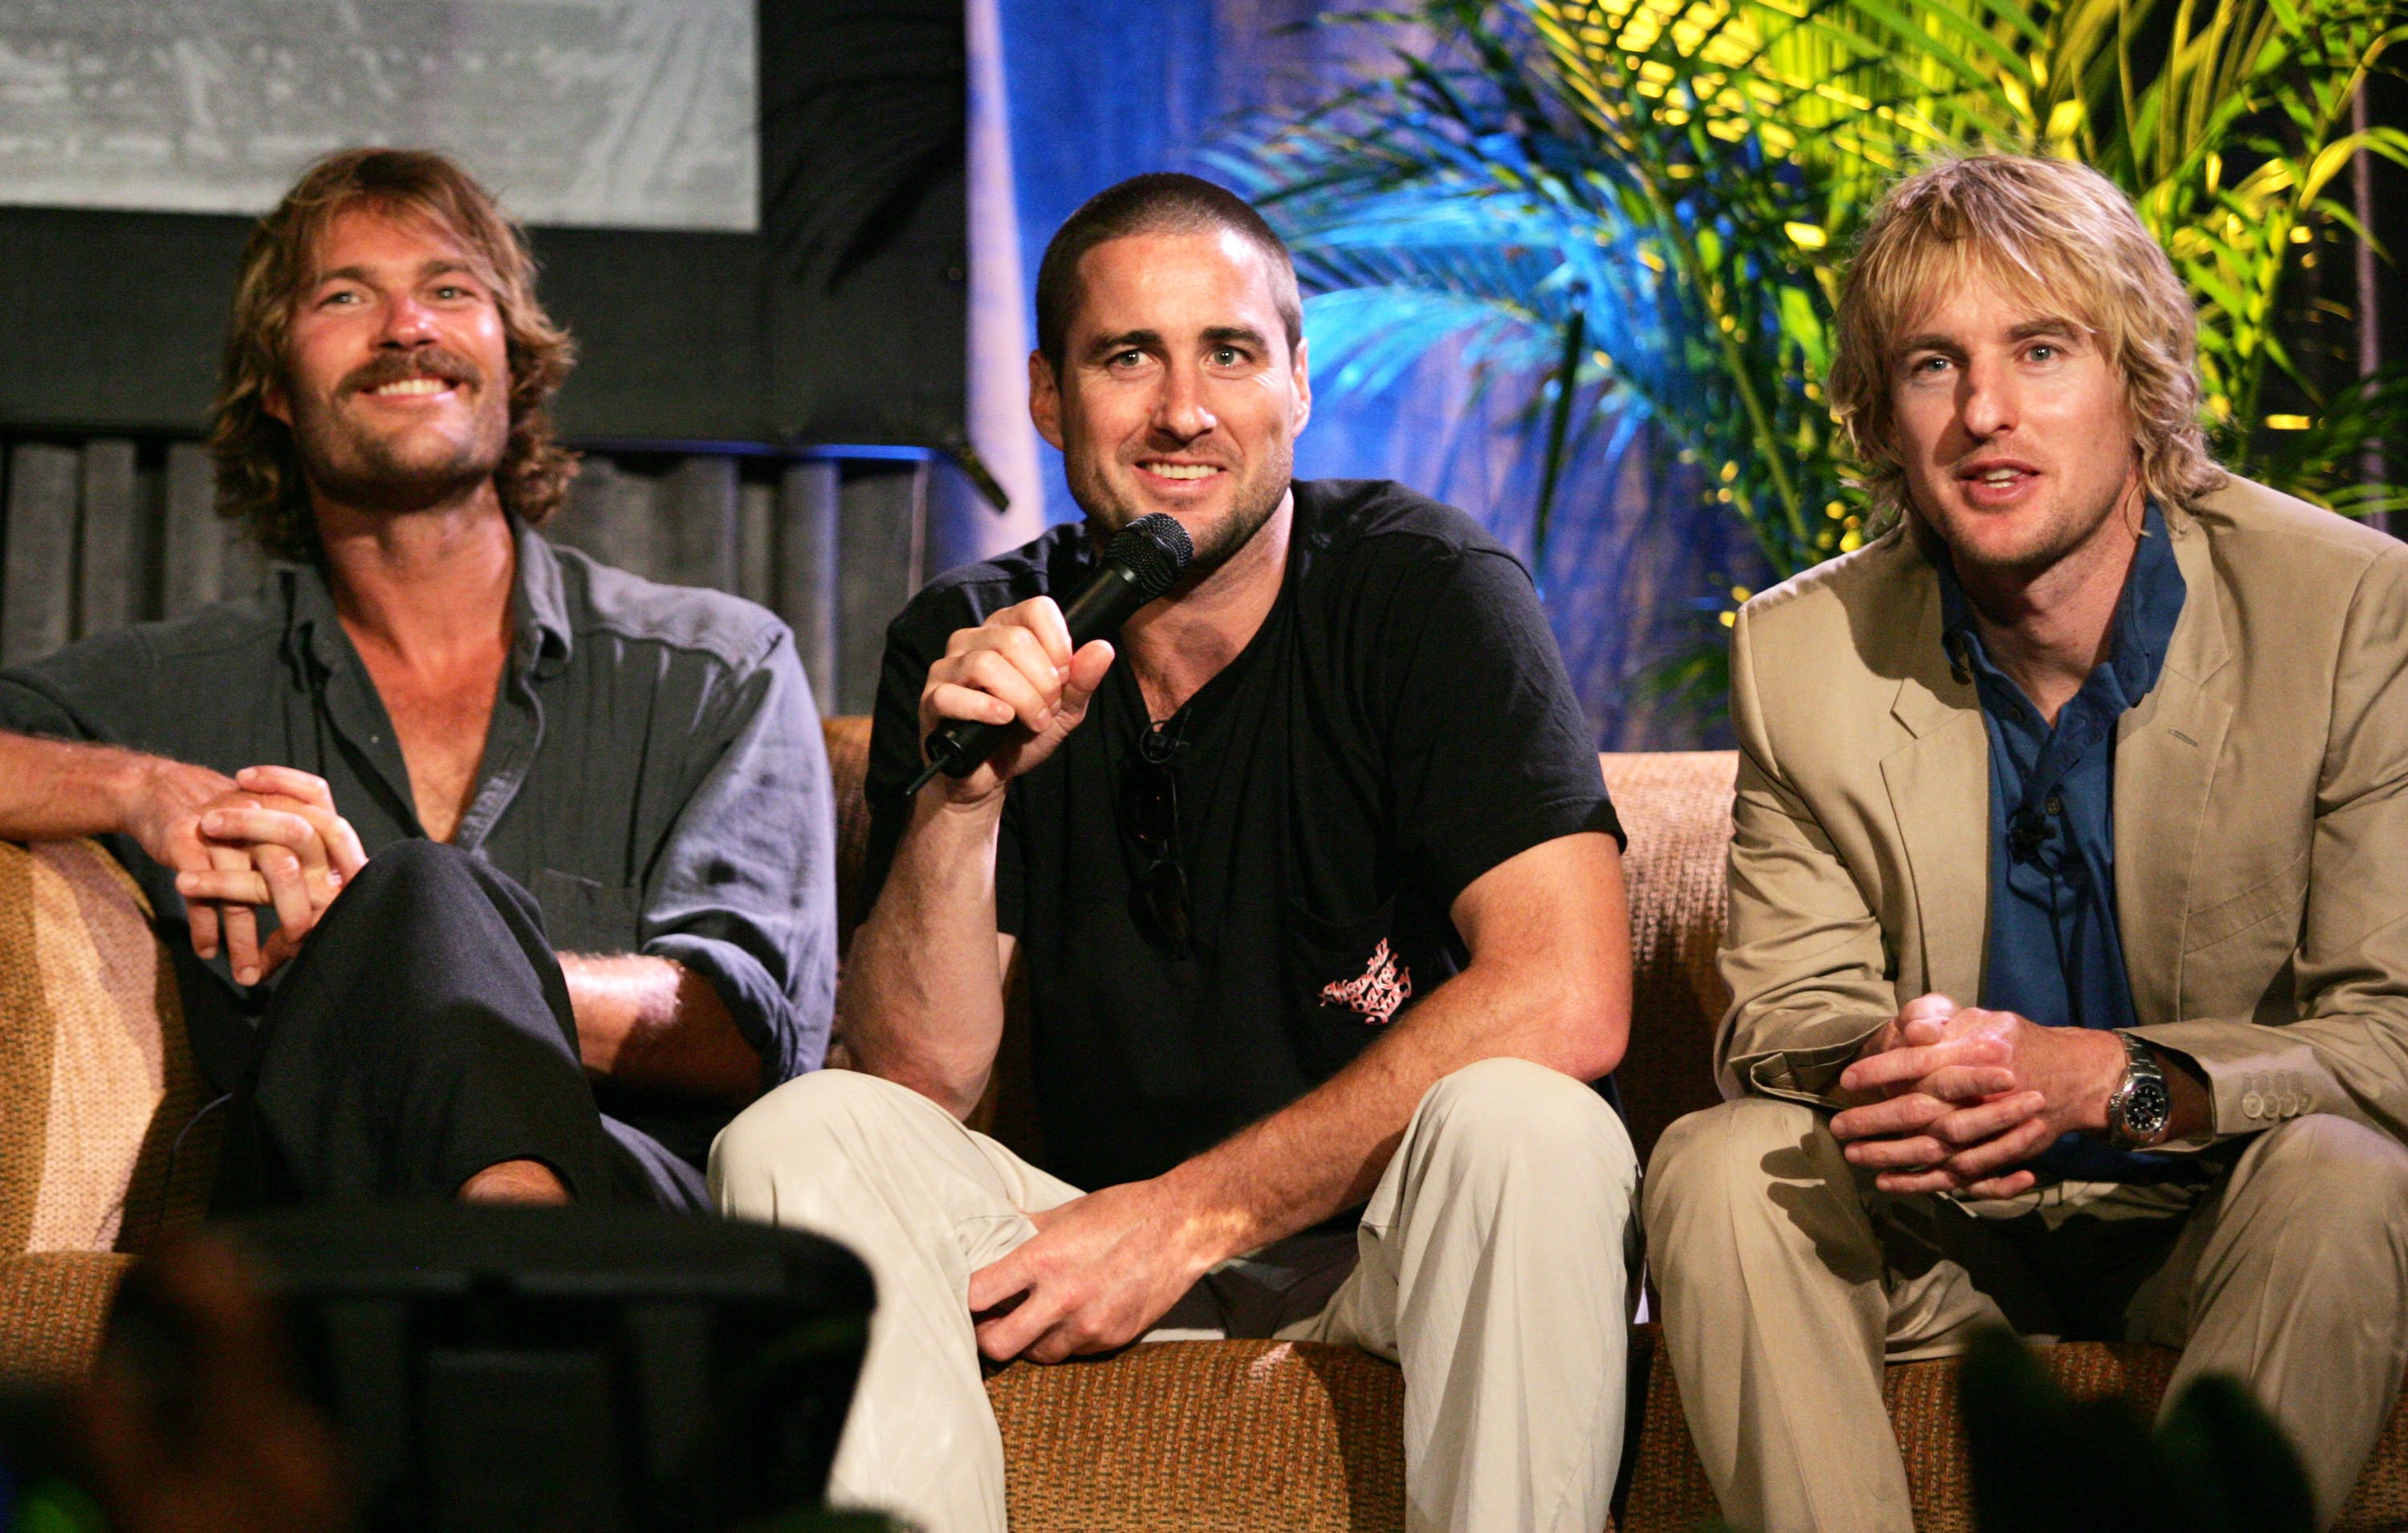 Andrew Wilson, Luke Wilson and Owen Wilson during 2005 Maui Film Festival - Tribute to the Wilson Brothers at Marriott Wailea, in Maui, Hawaii, United States | Source: Getty Images